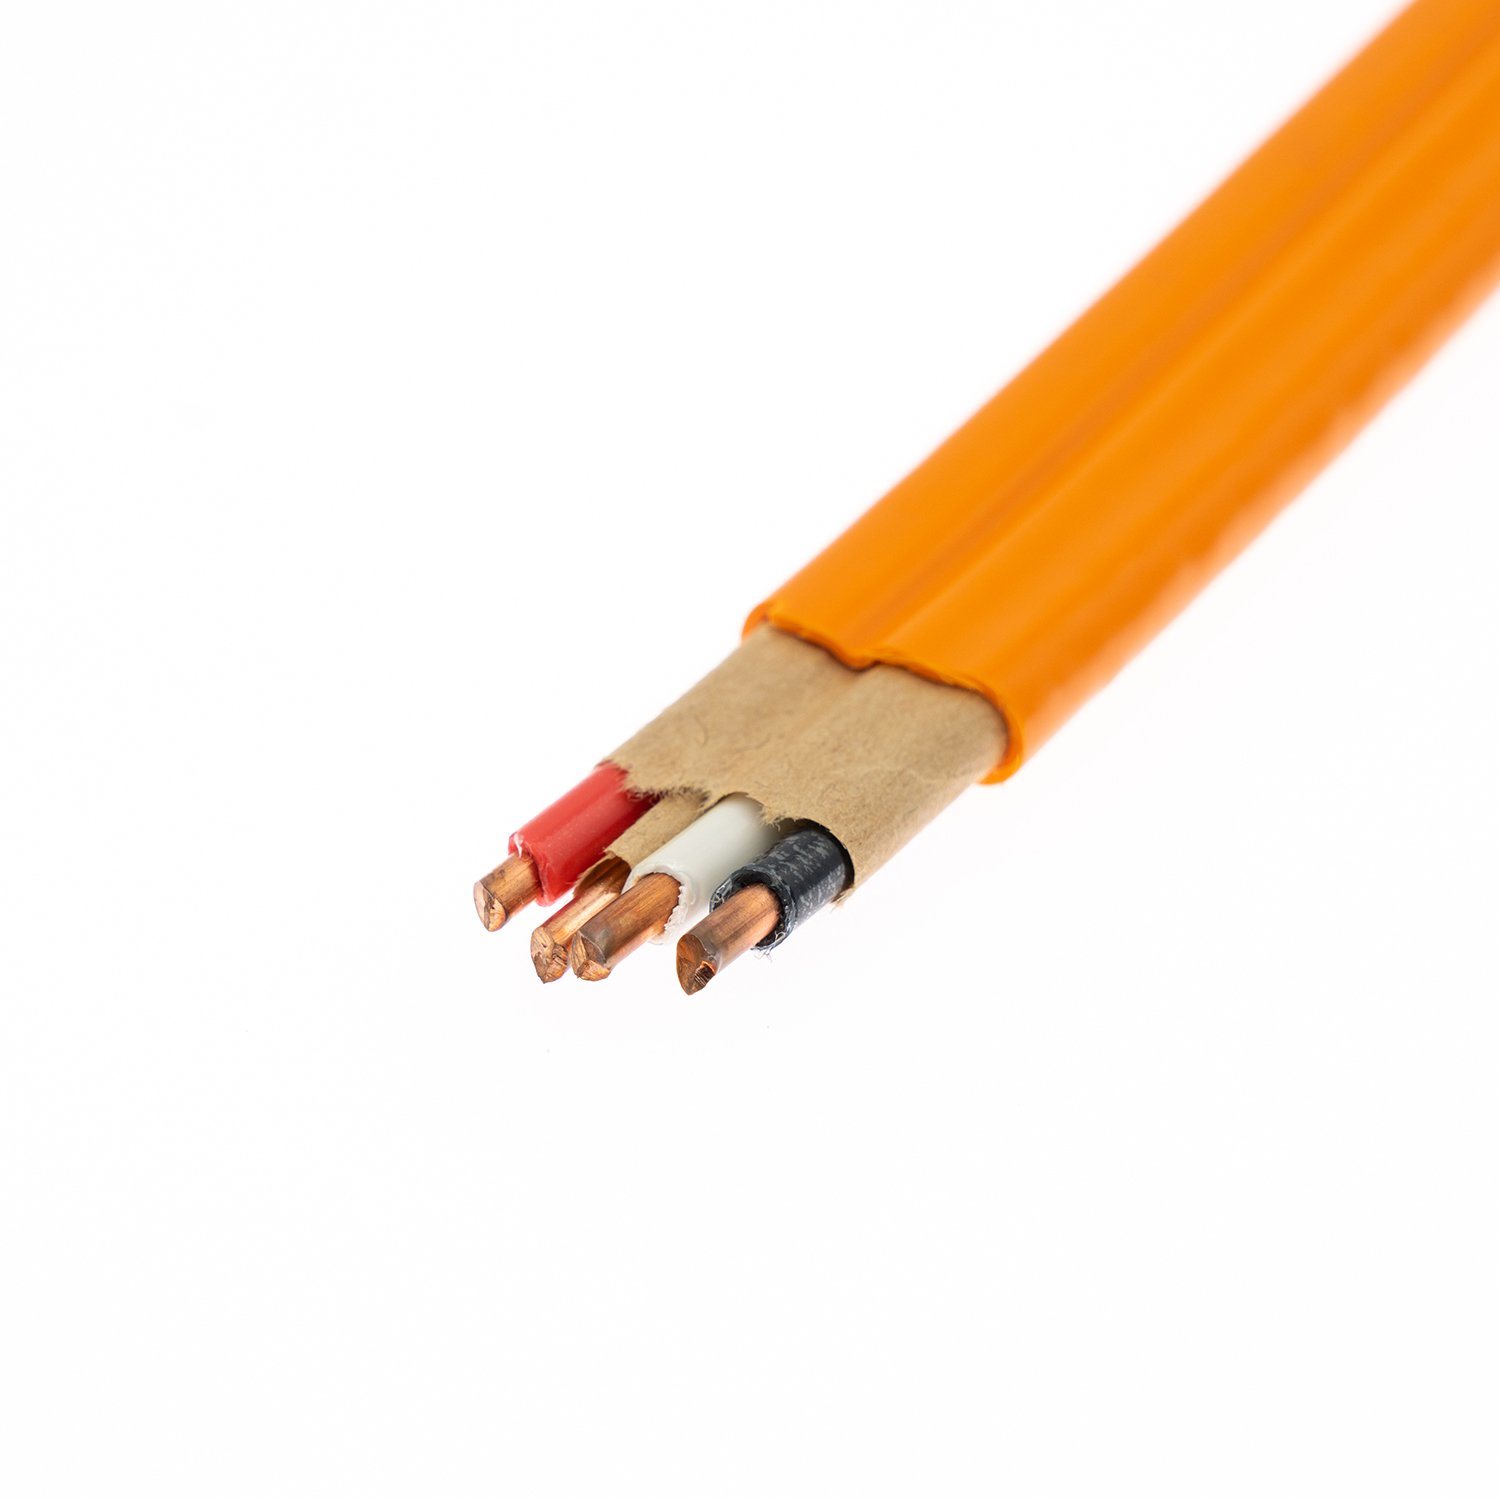 Nm-B Non-Metallic Residential Indoor PVC Insulated UL Wires